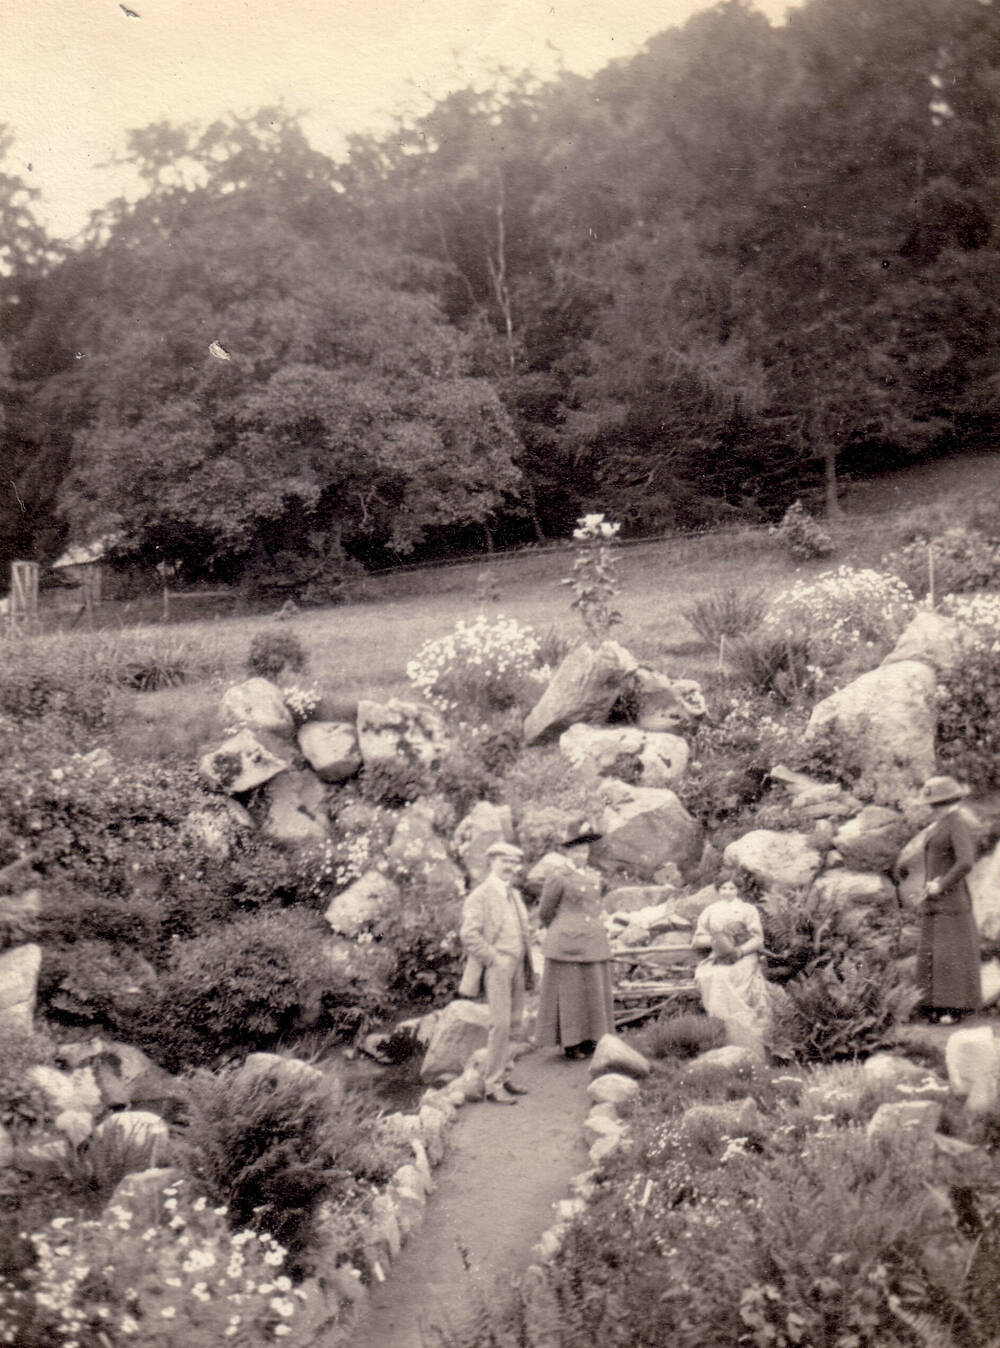 Black and white photograph of a densely planted rock garden